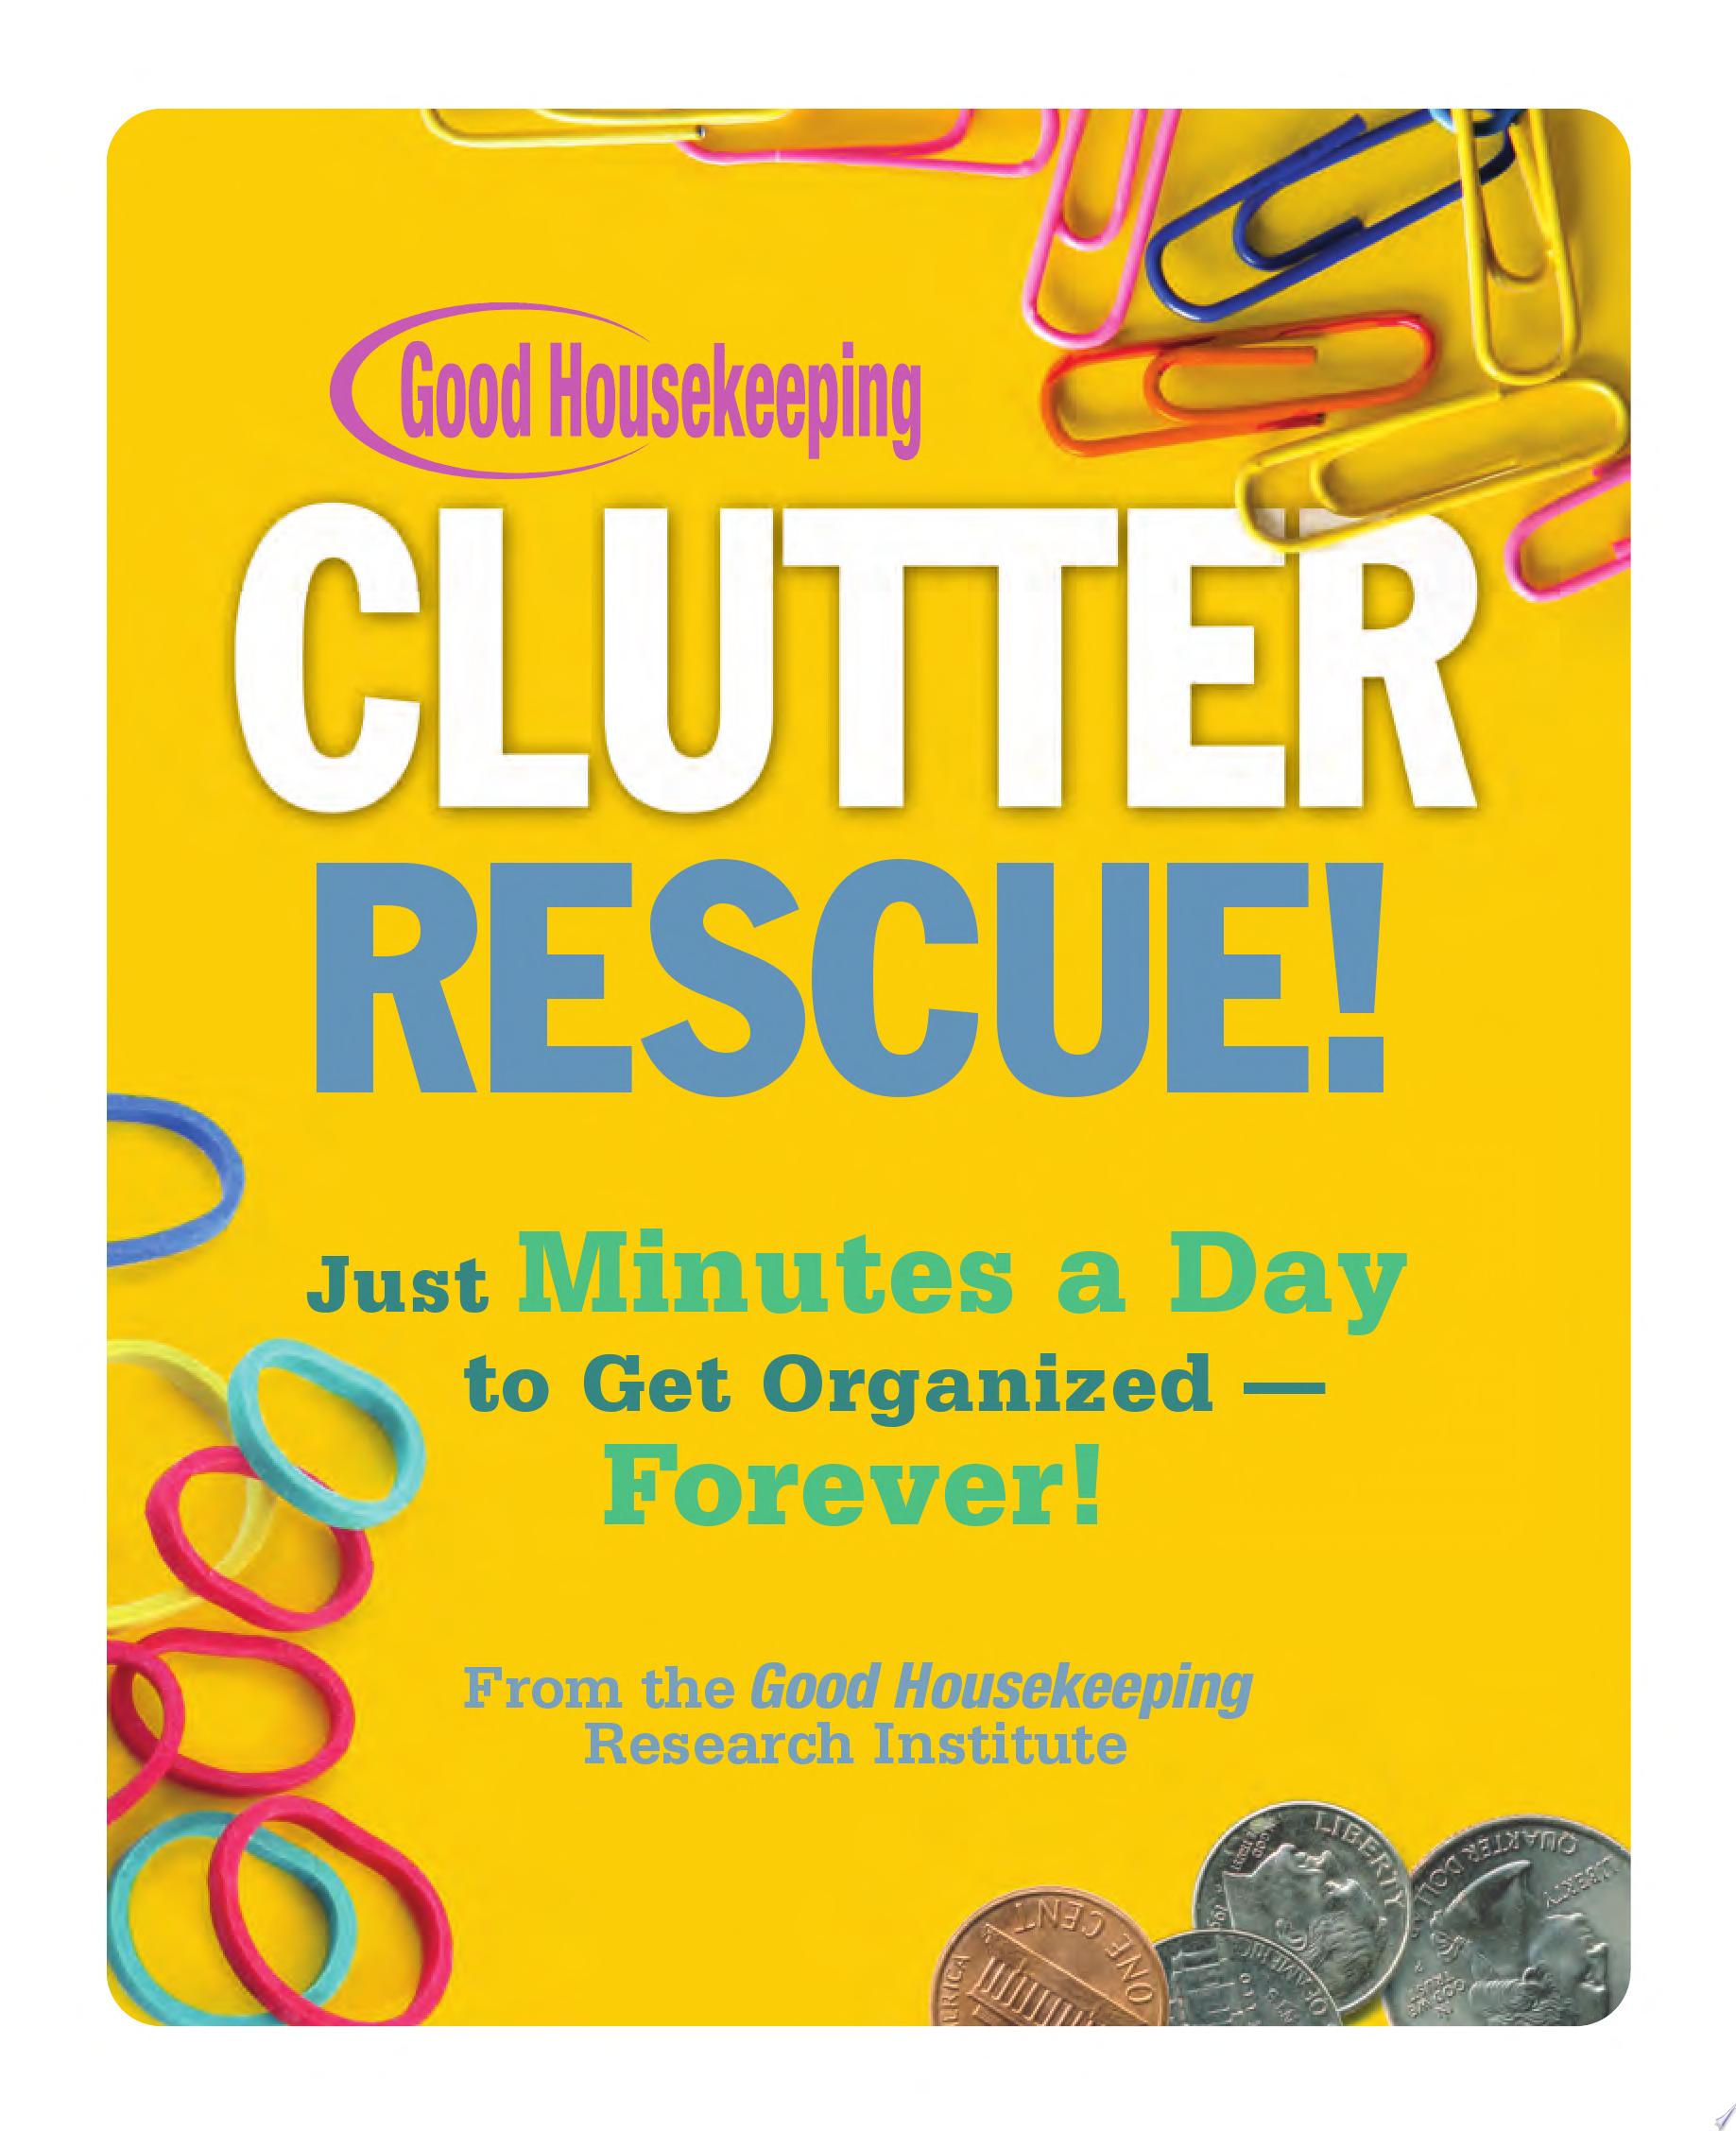 Image for "Good Housekeeping Clutter Rescue!"